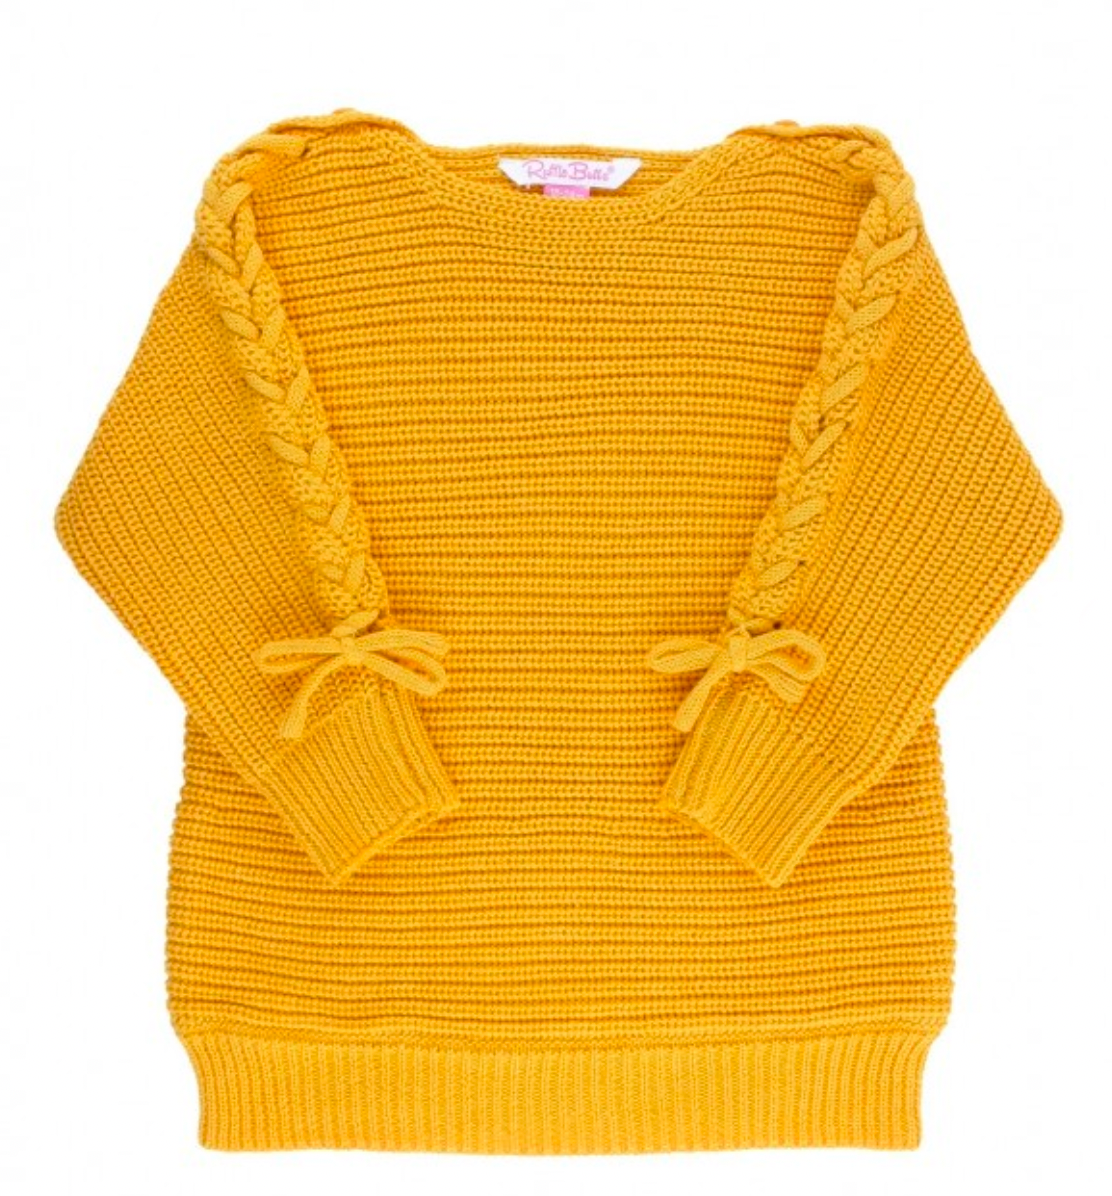 Golden Yellow Lace-Up Sweater Tunic